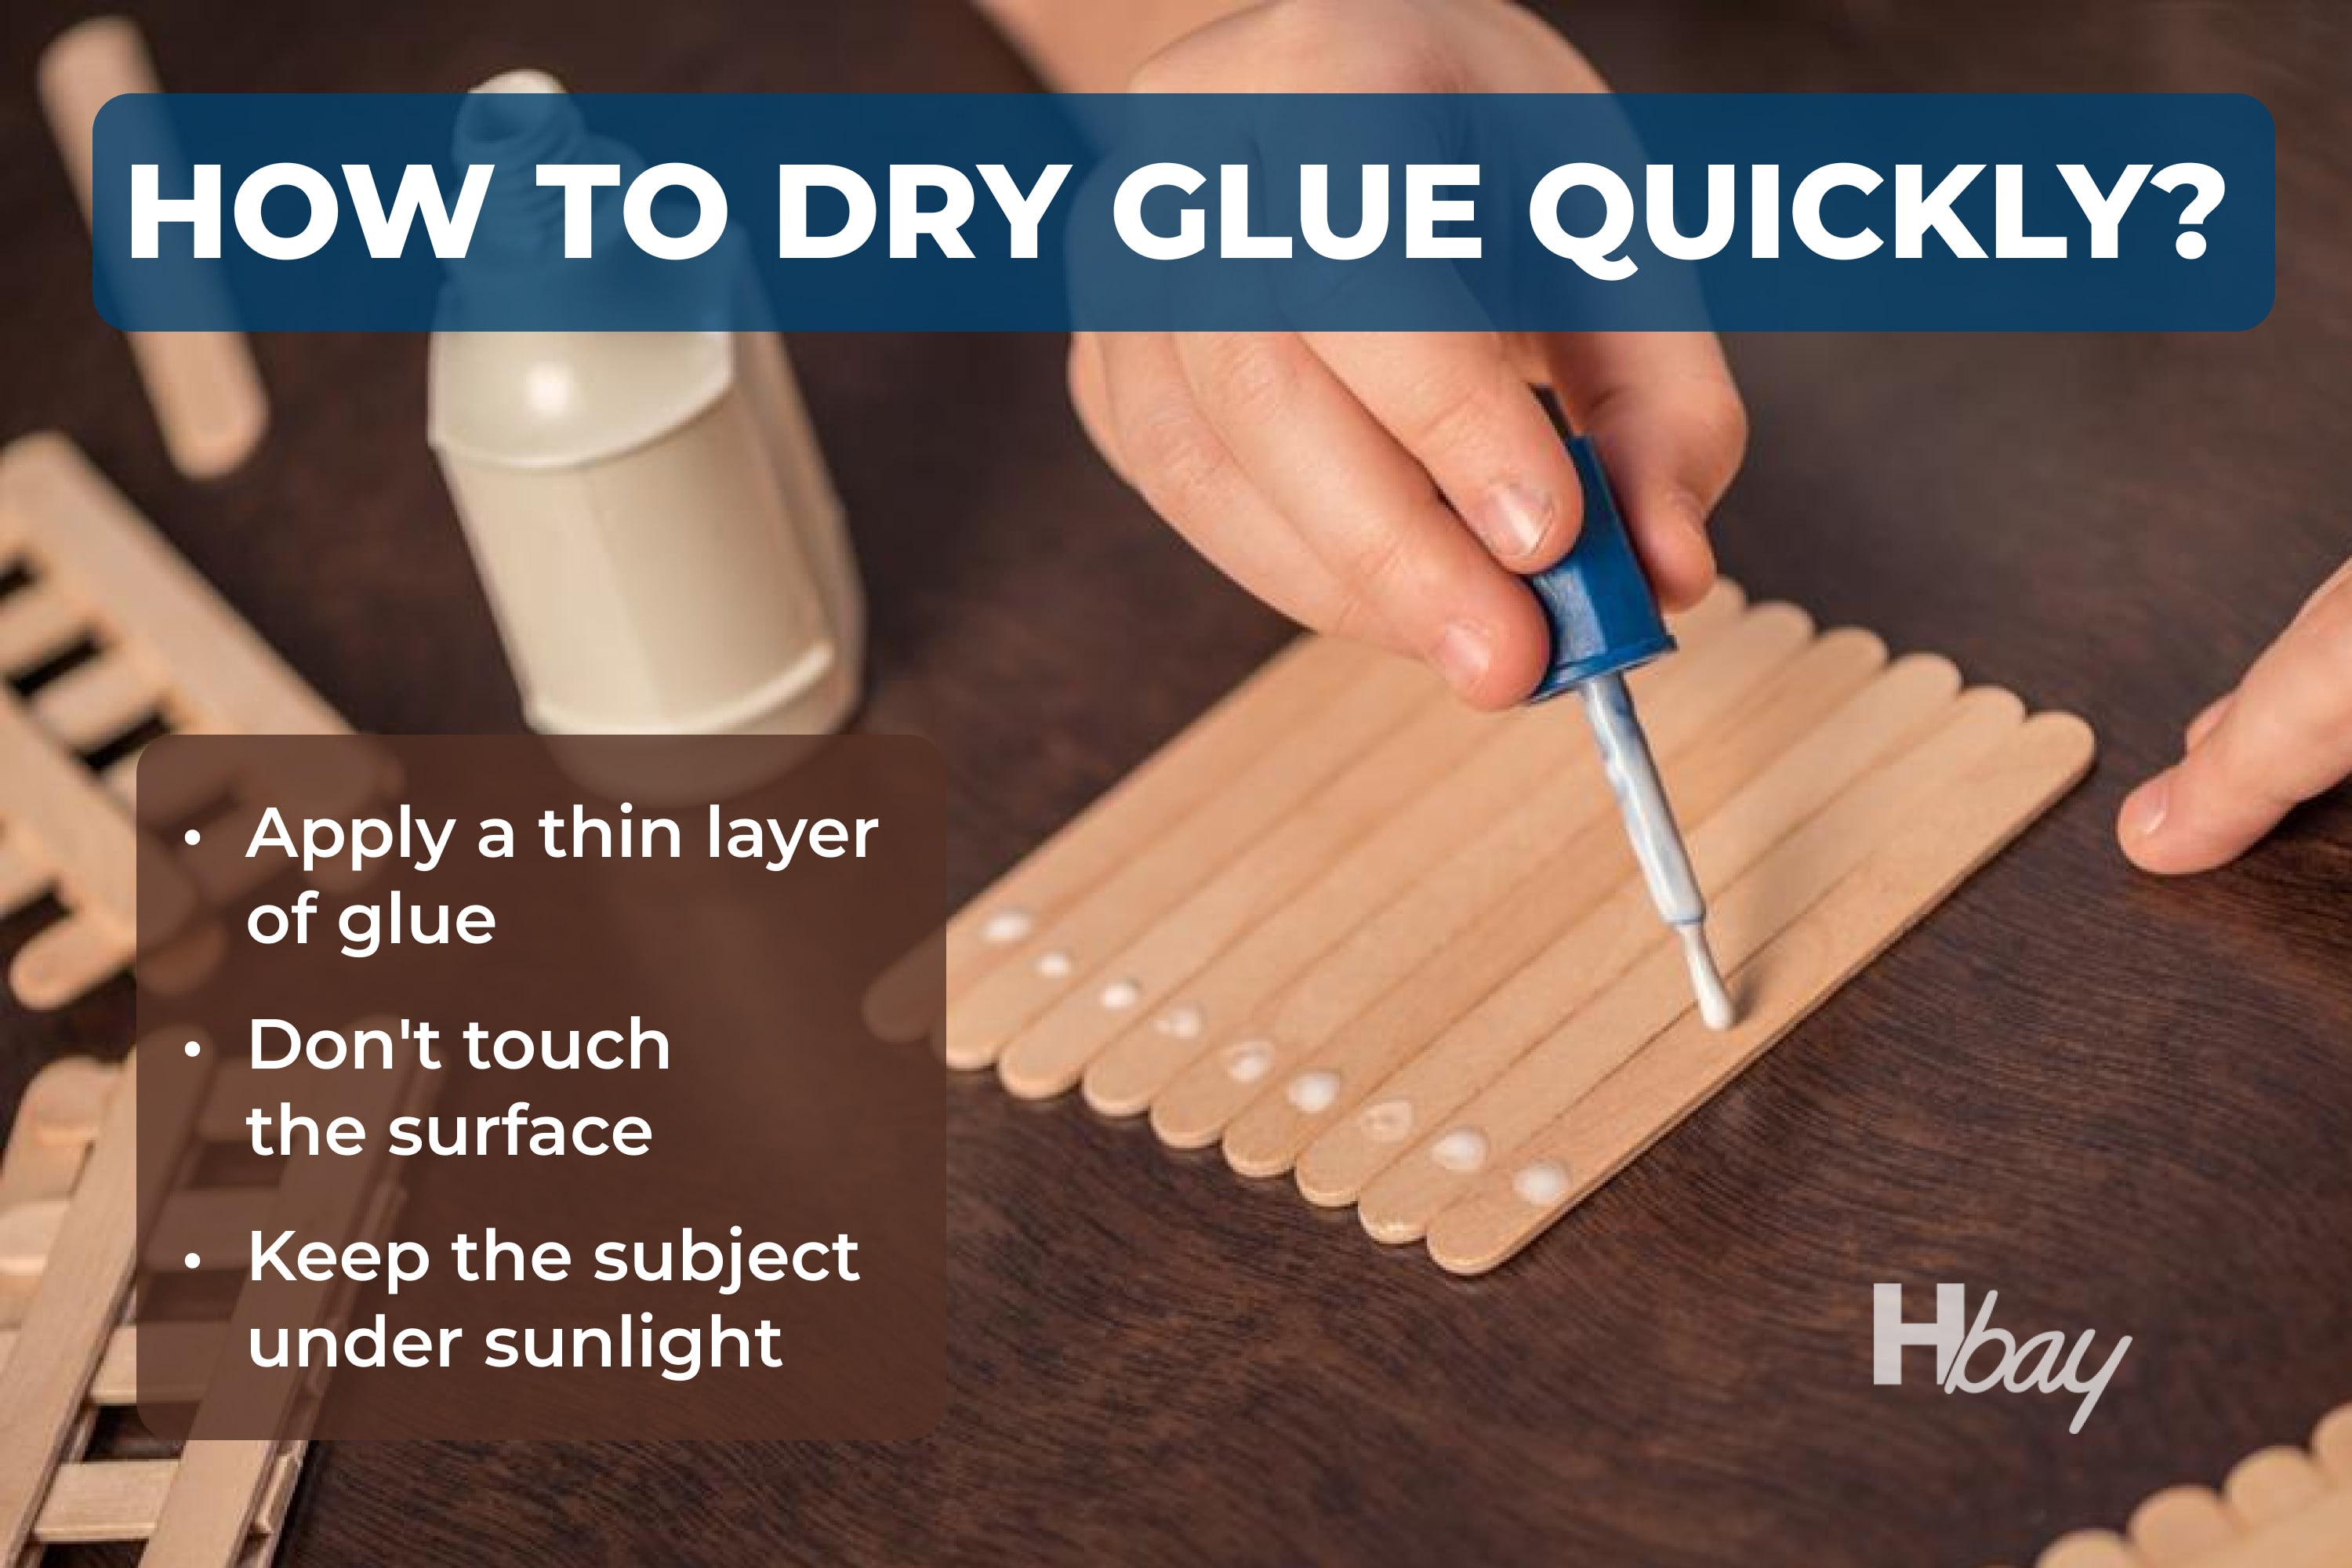 How to dry glue quickly